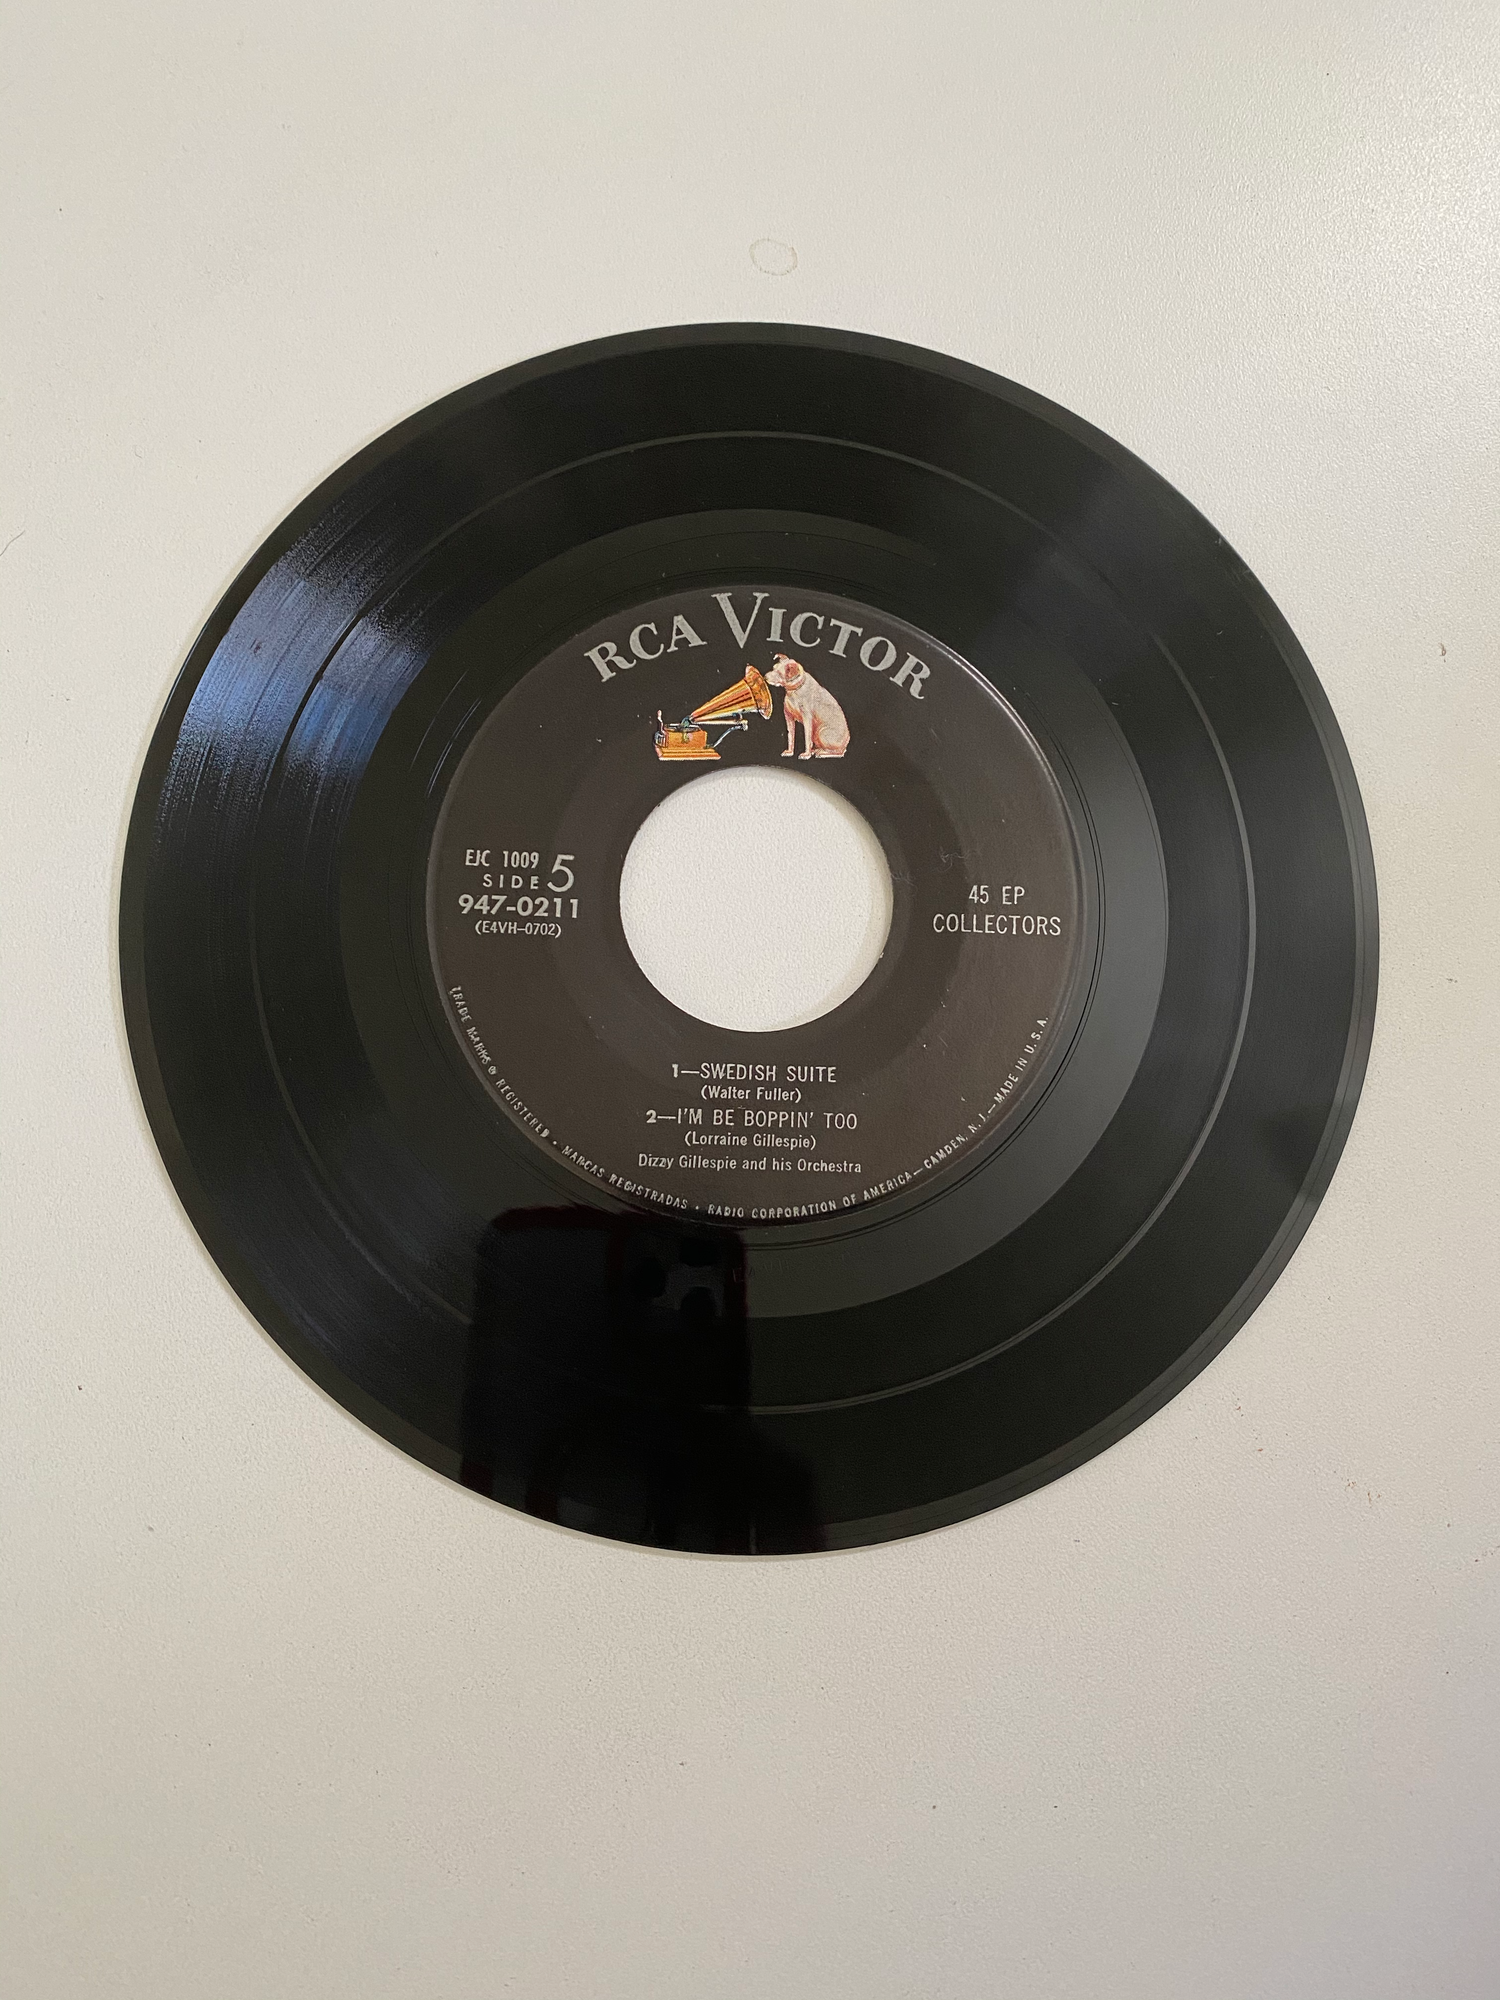 Dizzy Gillespie and his Orchestra - St. Louis Blues | 45 The Vintedge Co.